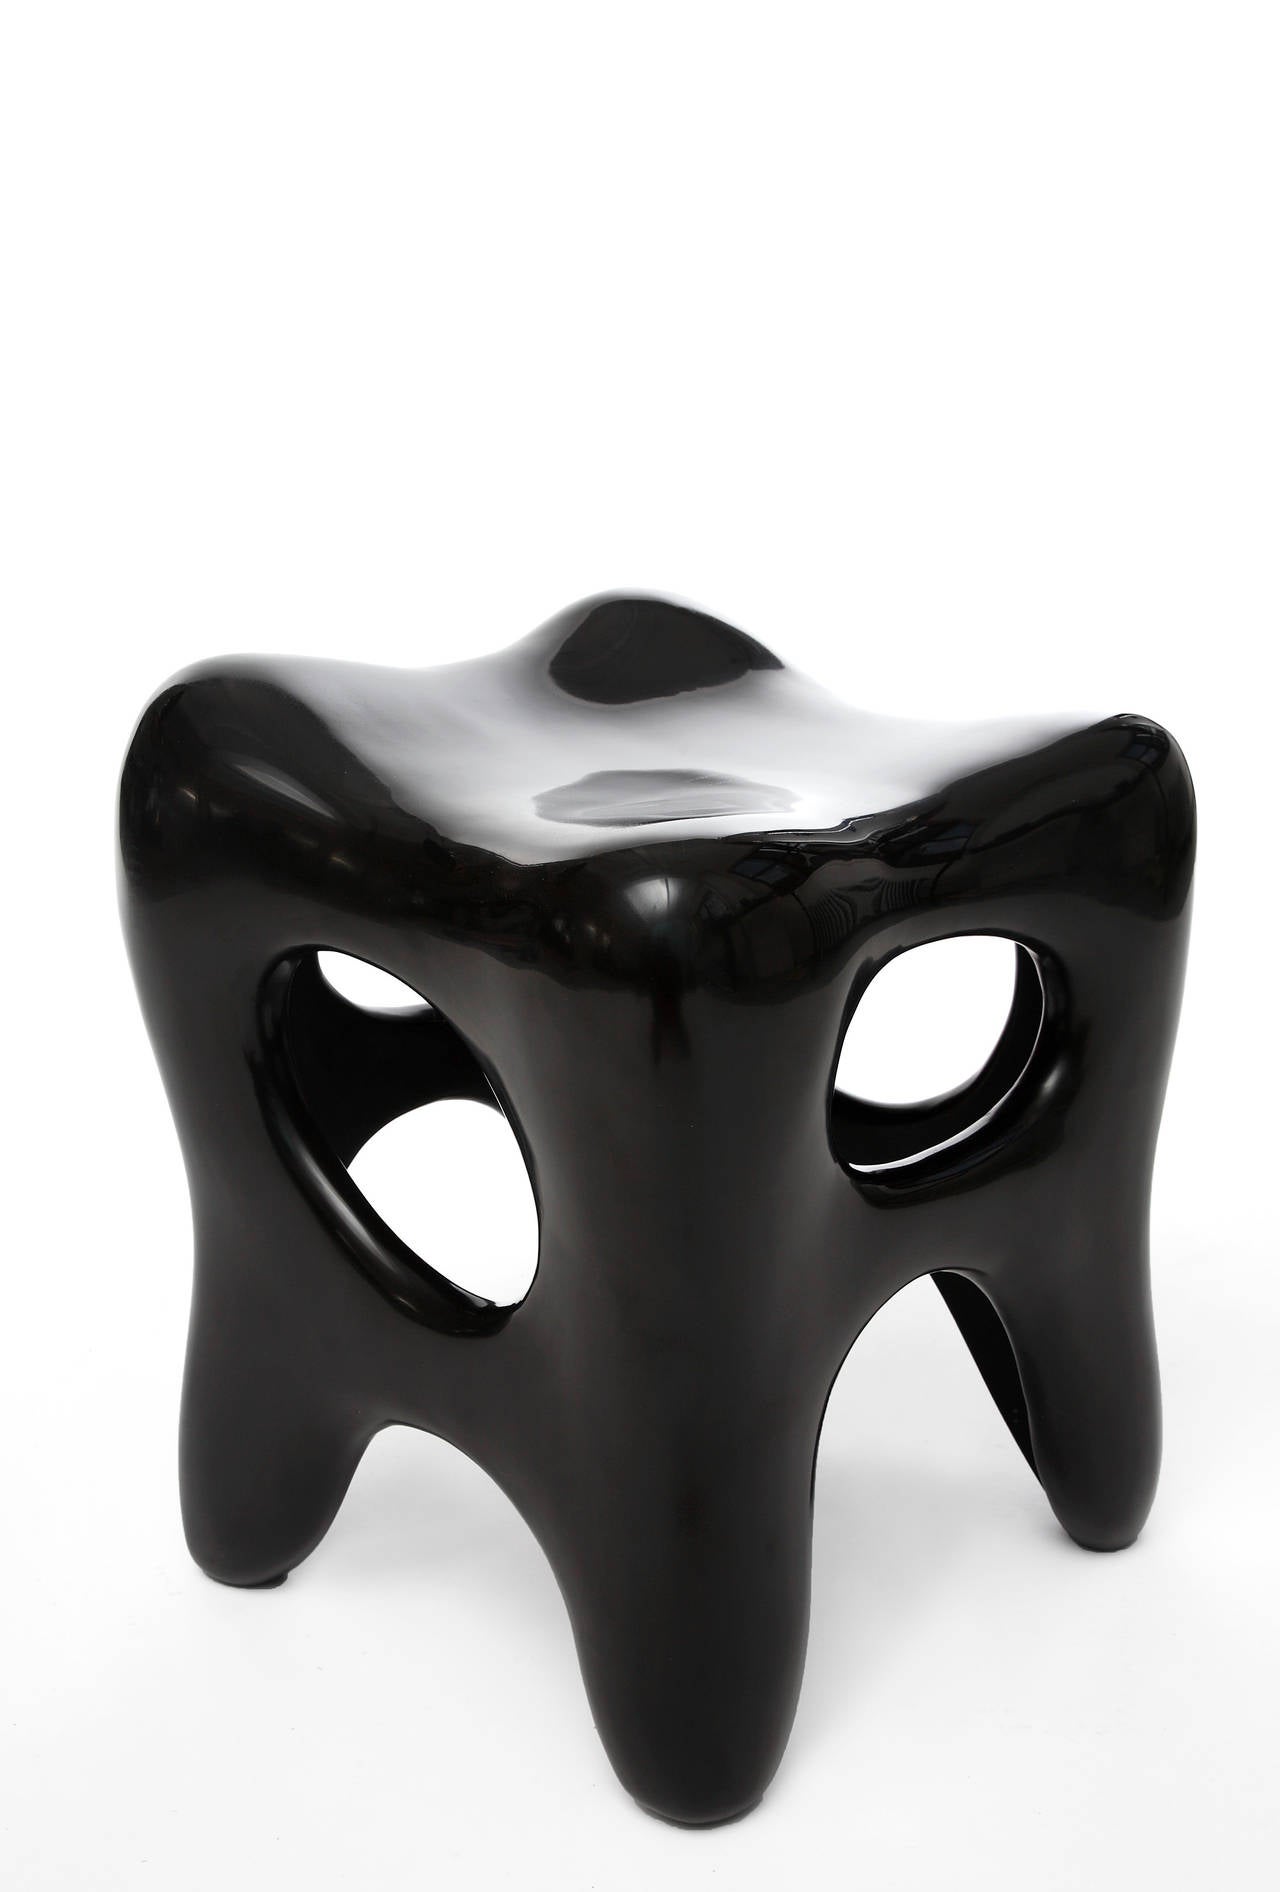 Sculpture stool by Jacques Jarrige work with his characteristic play on positive and negative spaces. These stools are hand lacquered and are very comfortable. The work of Jacques Jarrige is featured in Elle 2014, NYC&Garden 2004 , AD 2015 ,